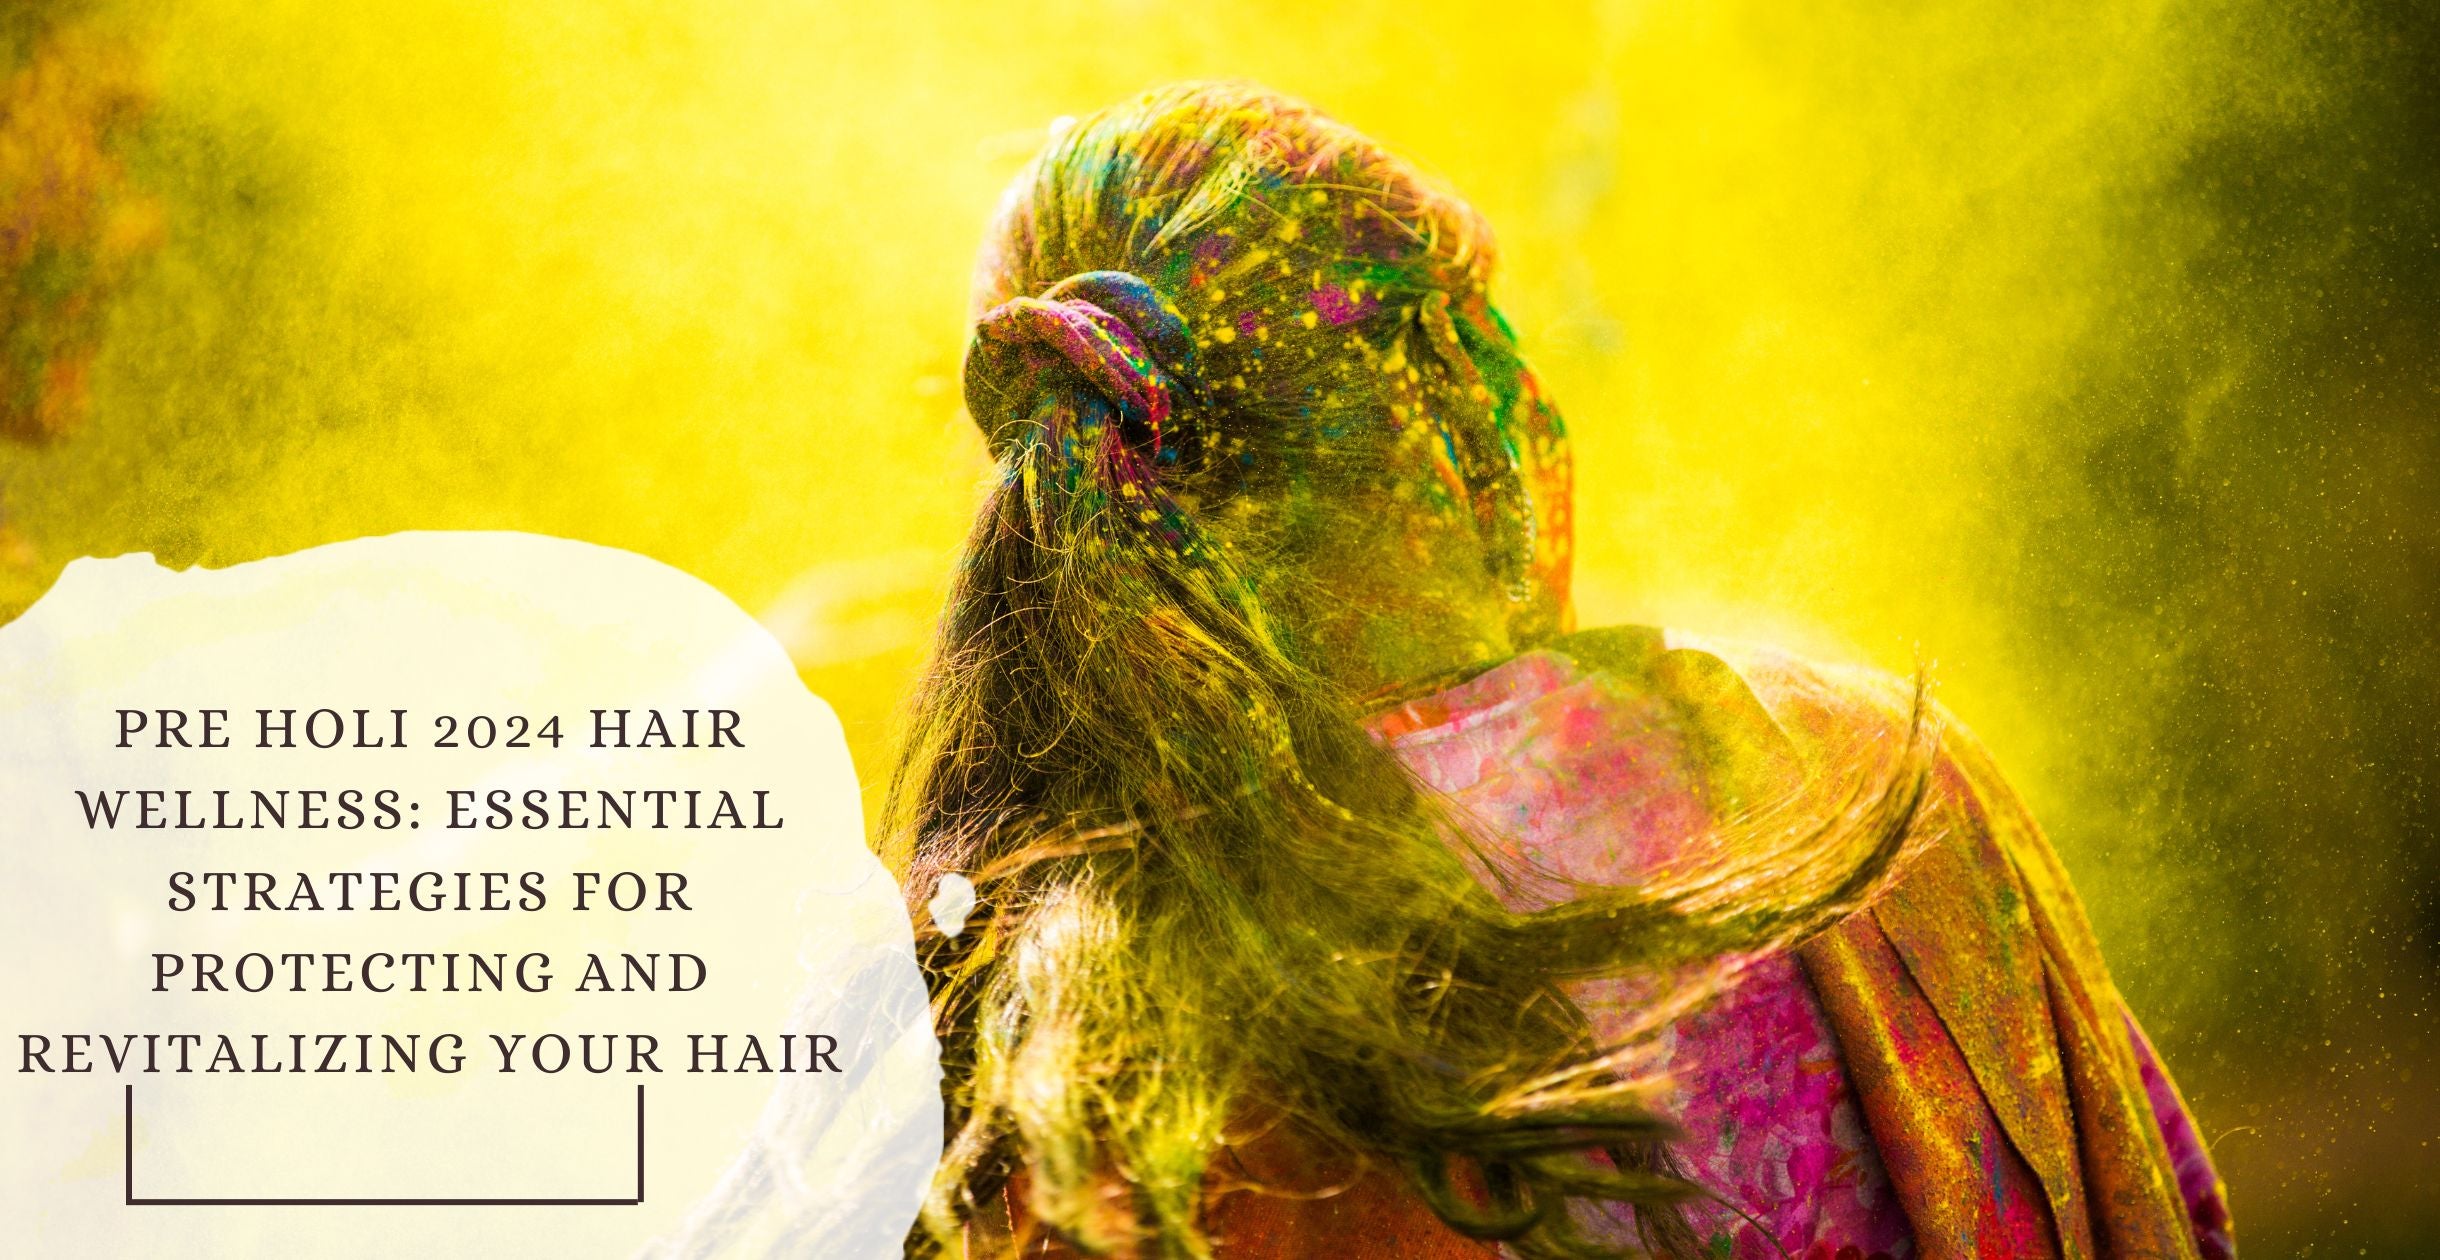 Pre Holi 2024 Hair Wellness: Essential Strategies for Protecting and Revitalizing Your Hair